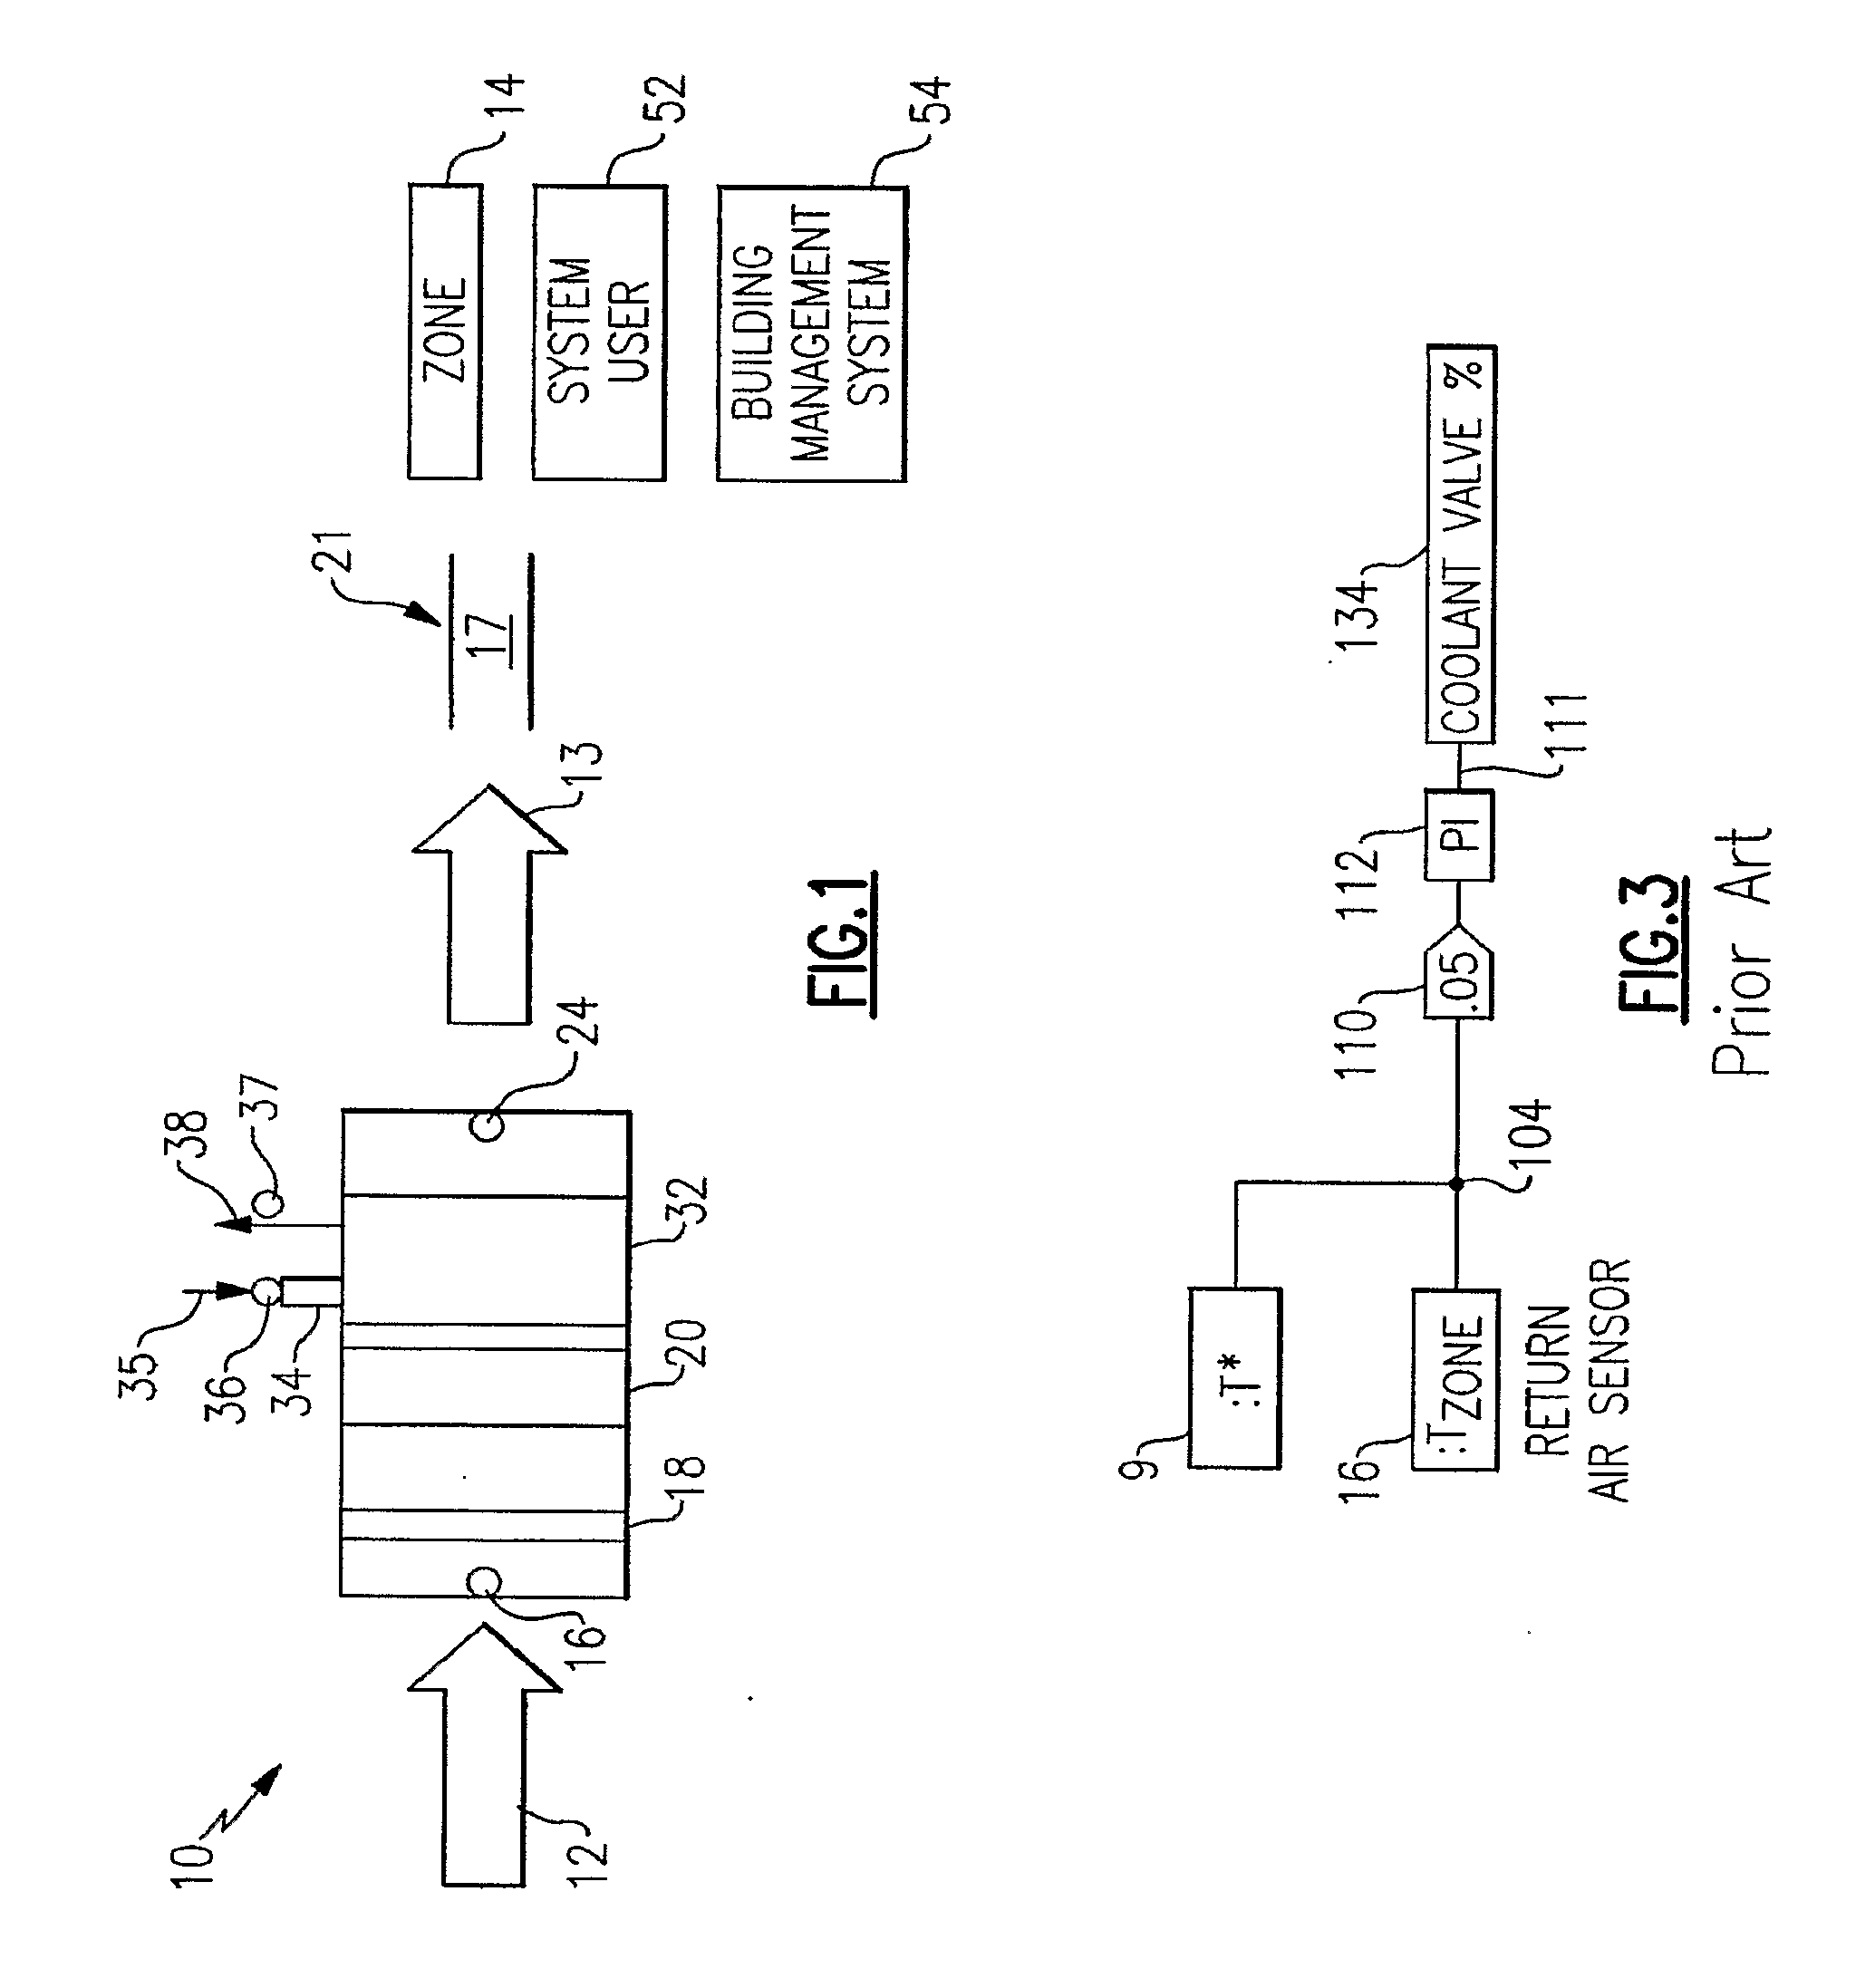 Air-conditioning control algorithm employing air and fluid inputs